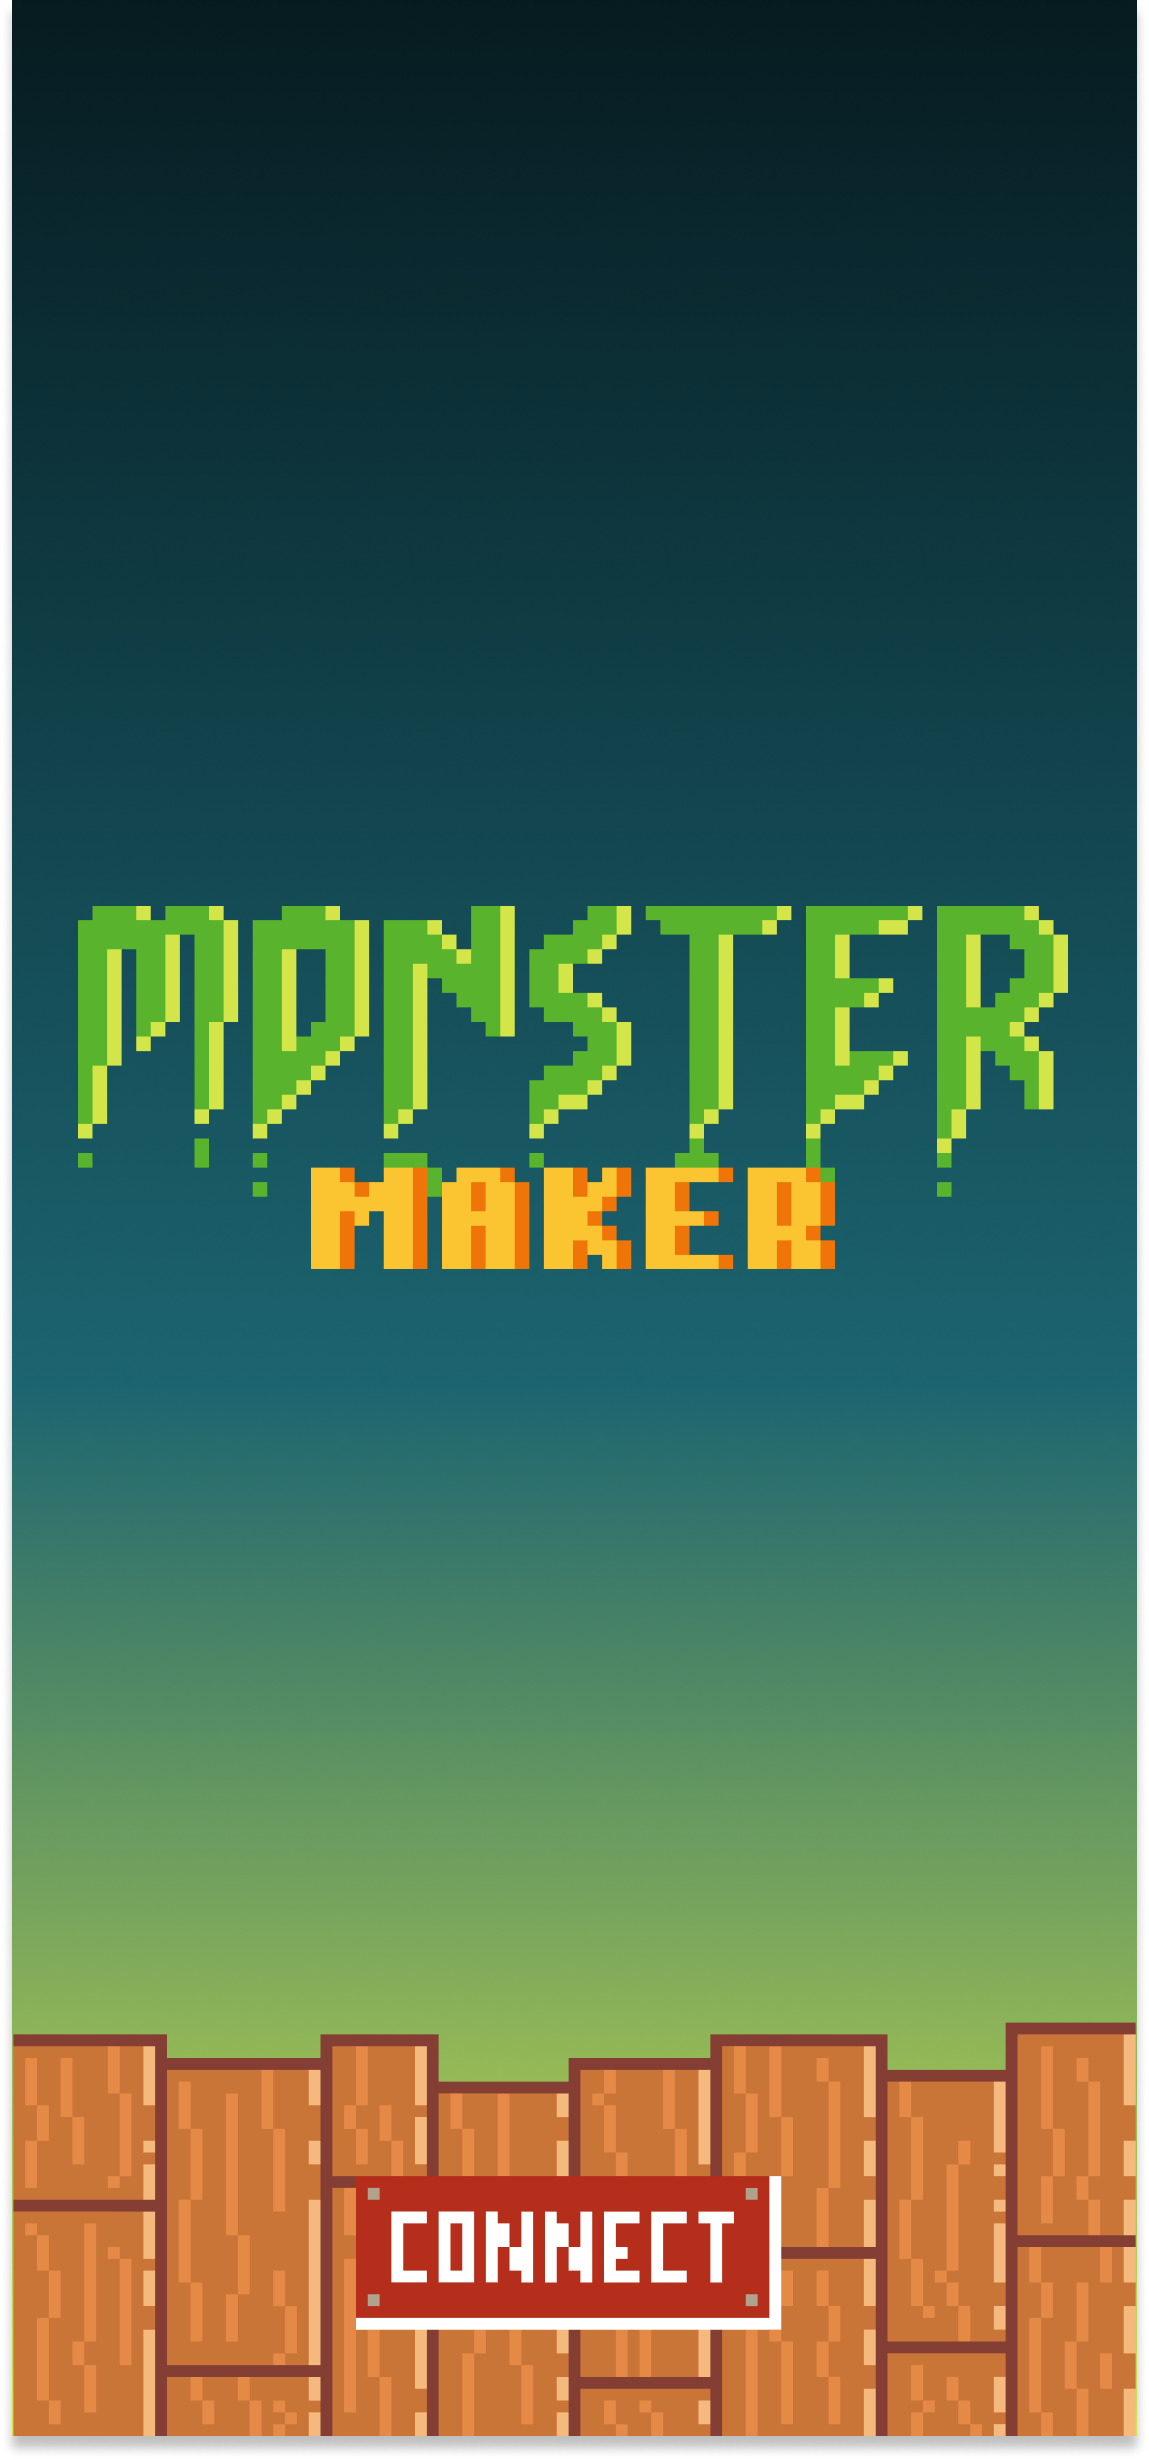 In Monster Maker, the Connect button triggers opening of Wallet Discovery